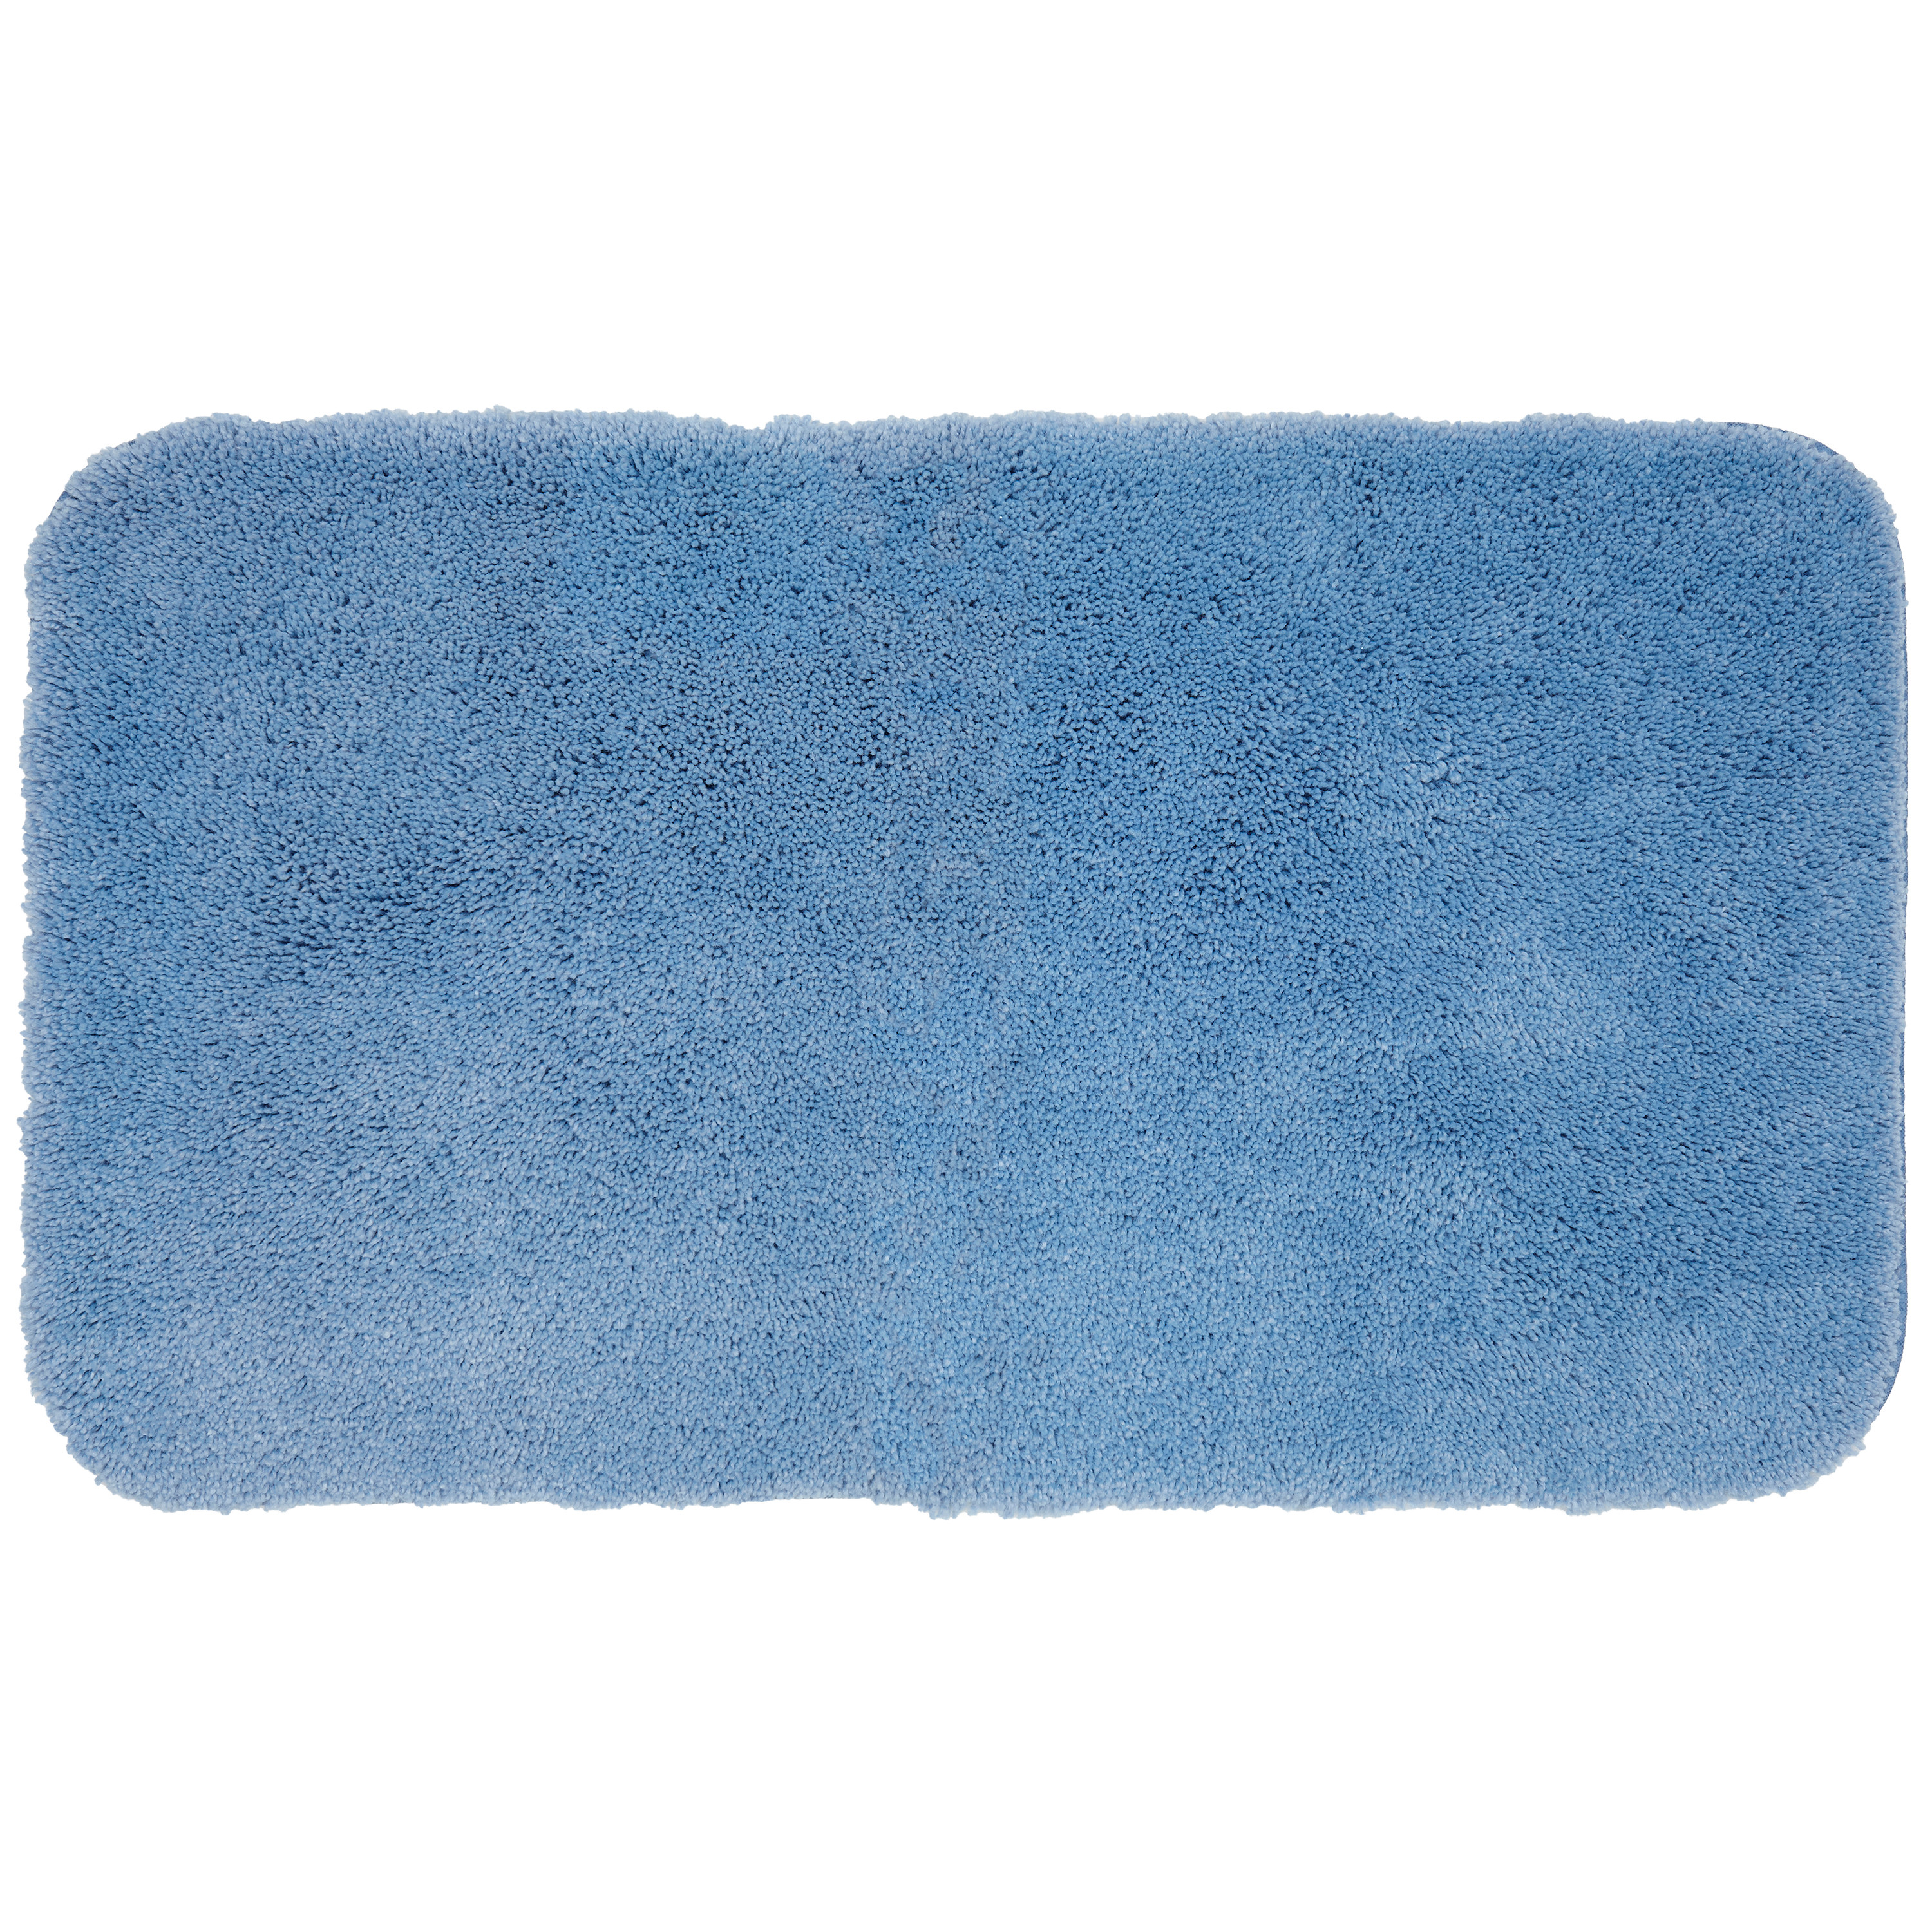 Mohawk Home Pure Perfection Nylon Bath Rug Scatter, Light Blue 1'5" x 2' - image 1 of 4